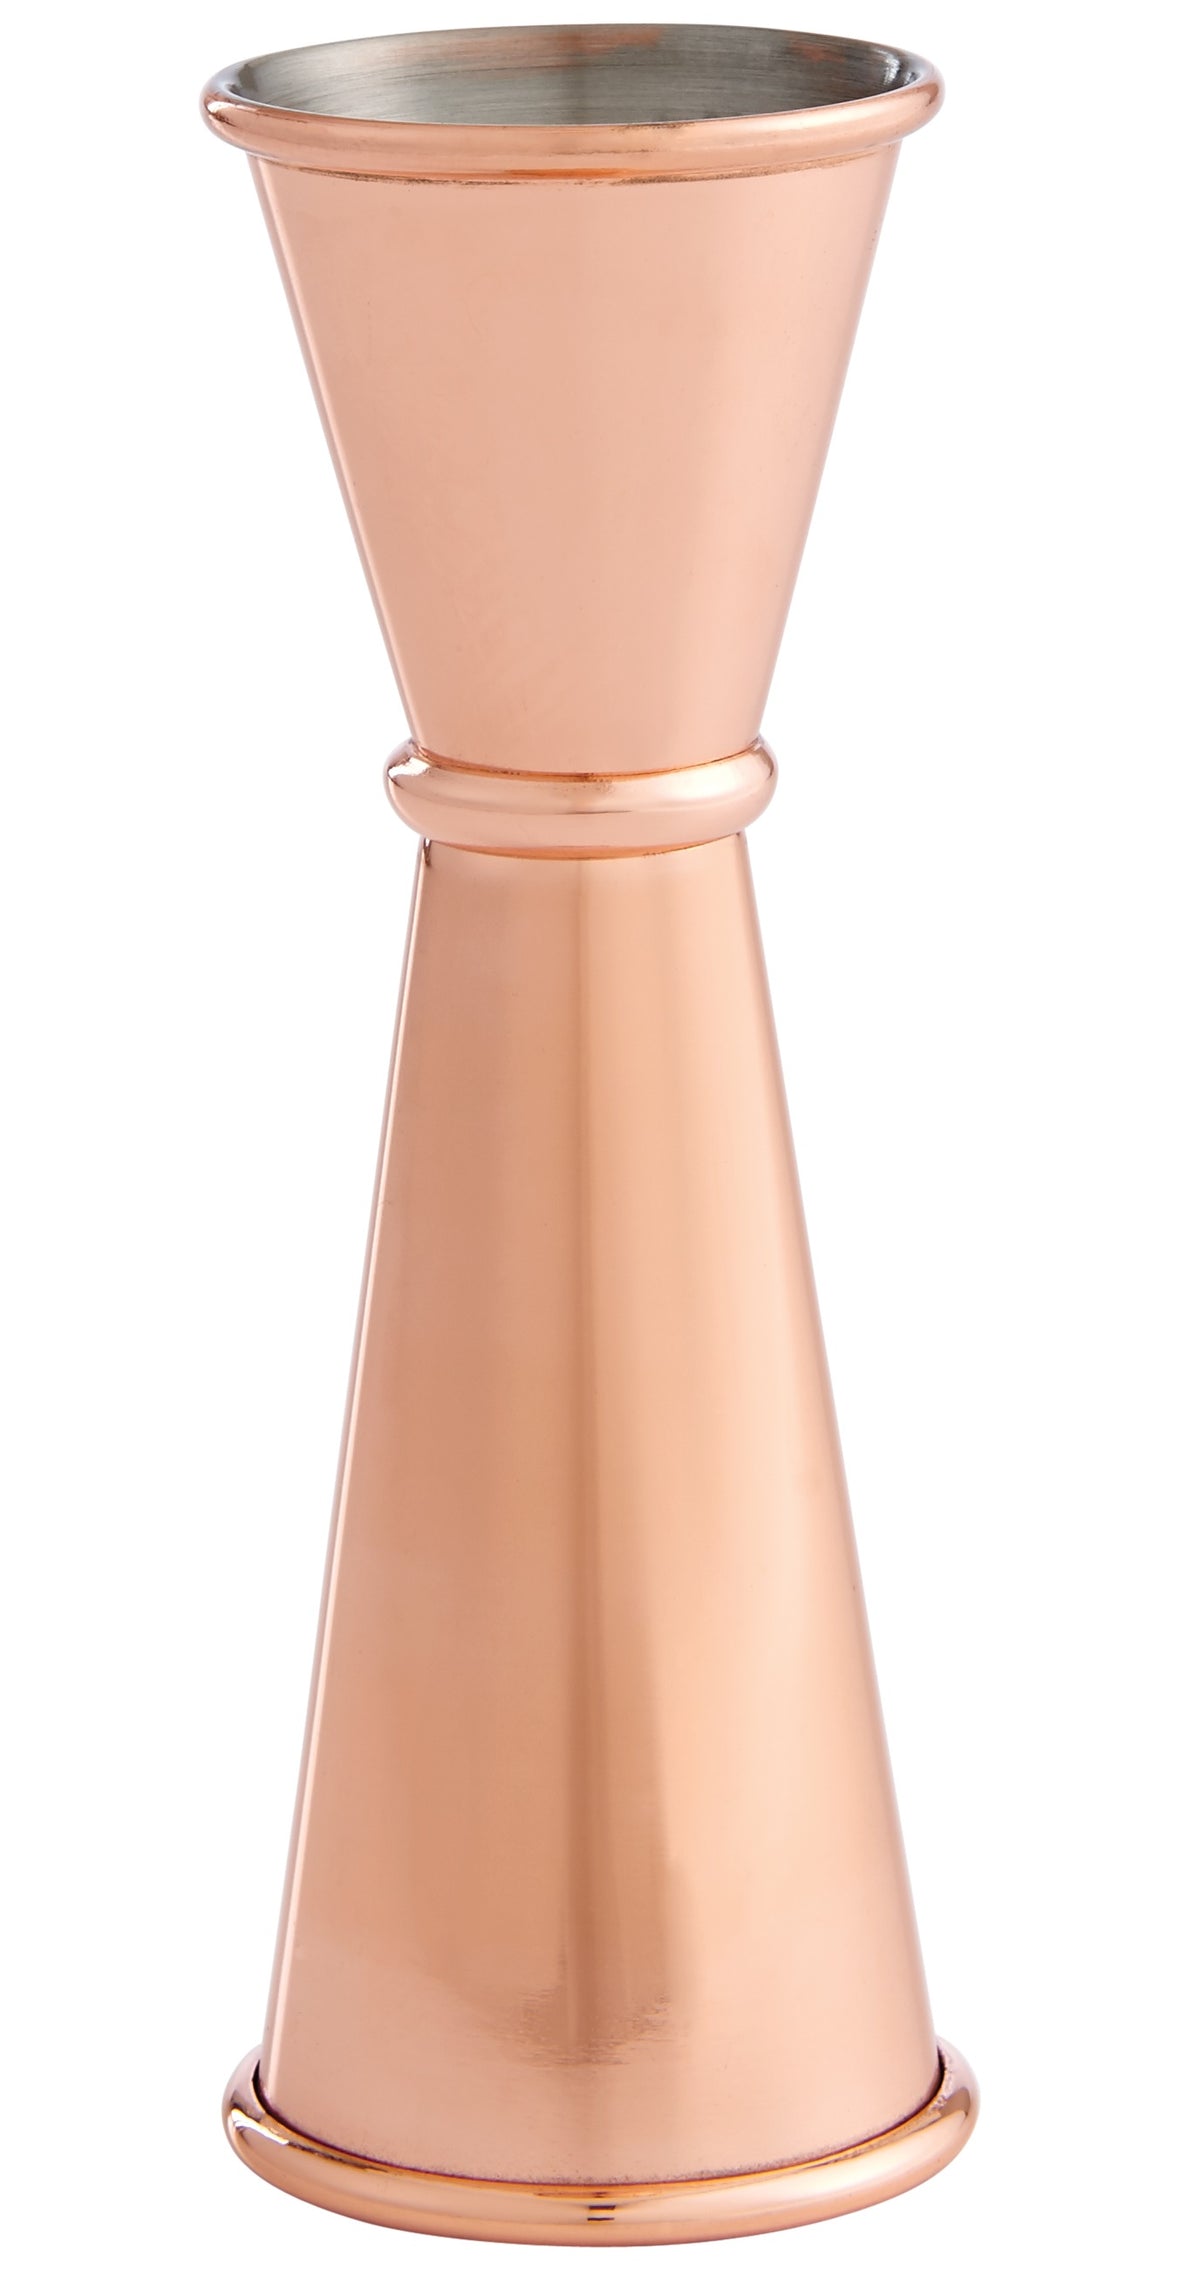 Harold Import 48032 Double Cocktail Jigger, Copper-Plated